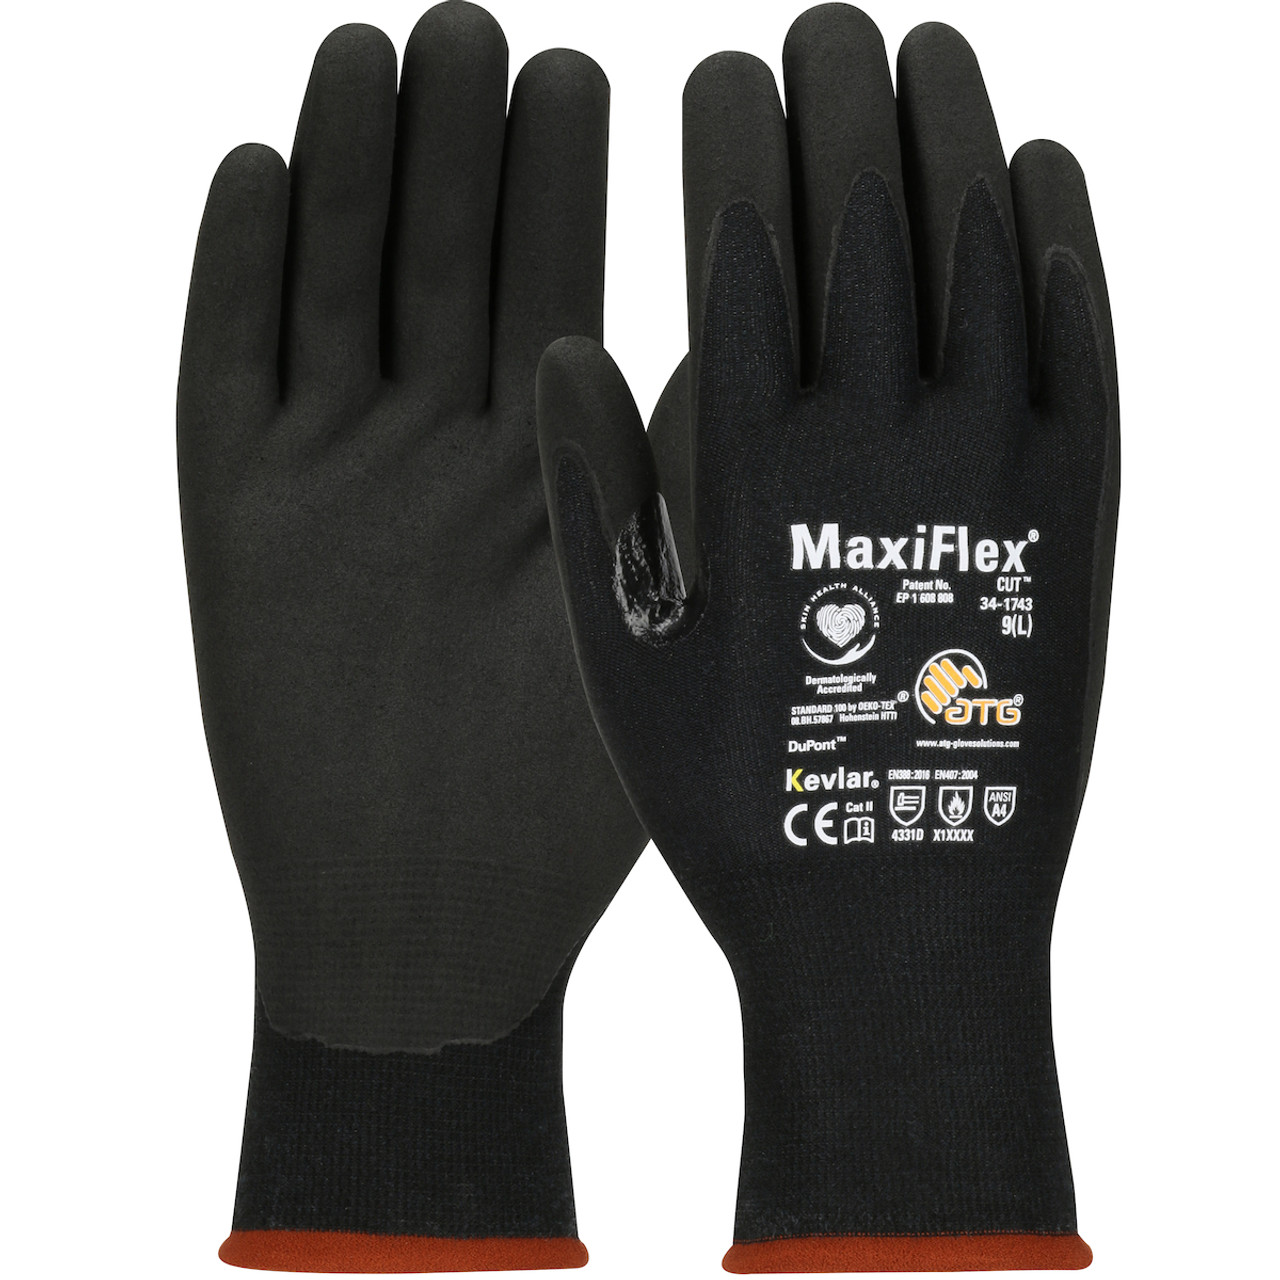 Time-limited Specials DuPont Announces Winners of the 2018 DuPont Kevlar  Glove Innovation Awards, 2018-11-09, roofing gloves